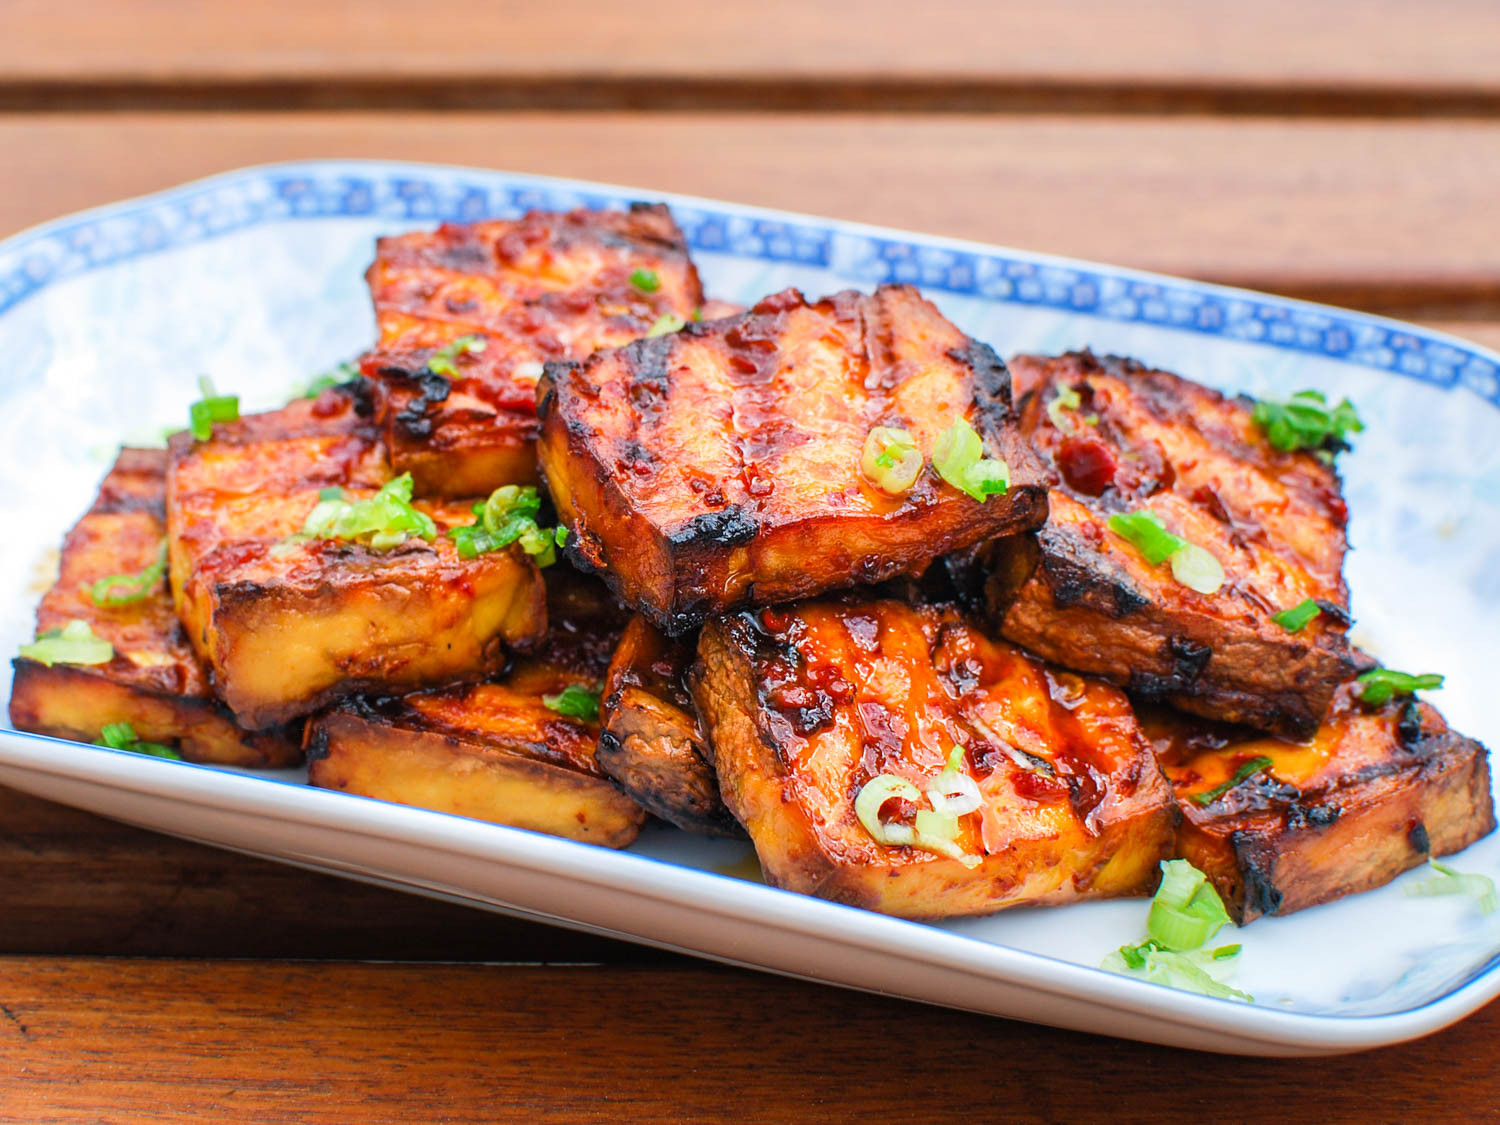 Chicken And Tofu Recipes
 Cuisines Collide in This Grilled Tofu With Chipotle Miso